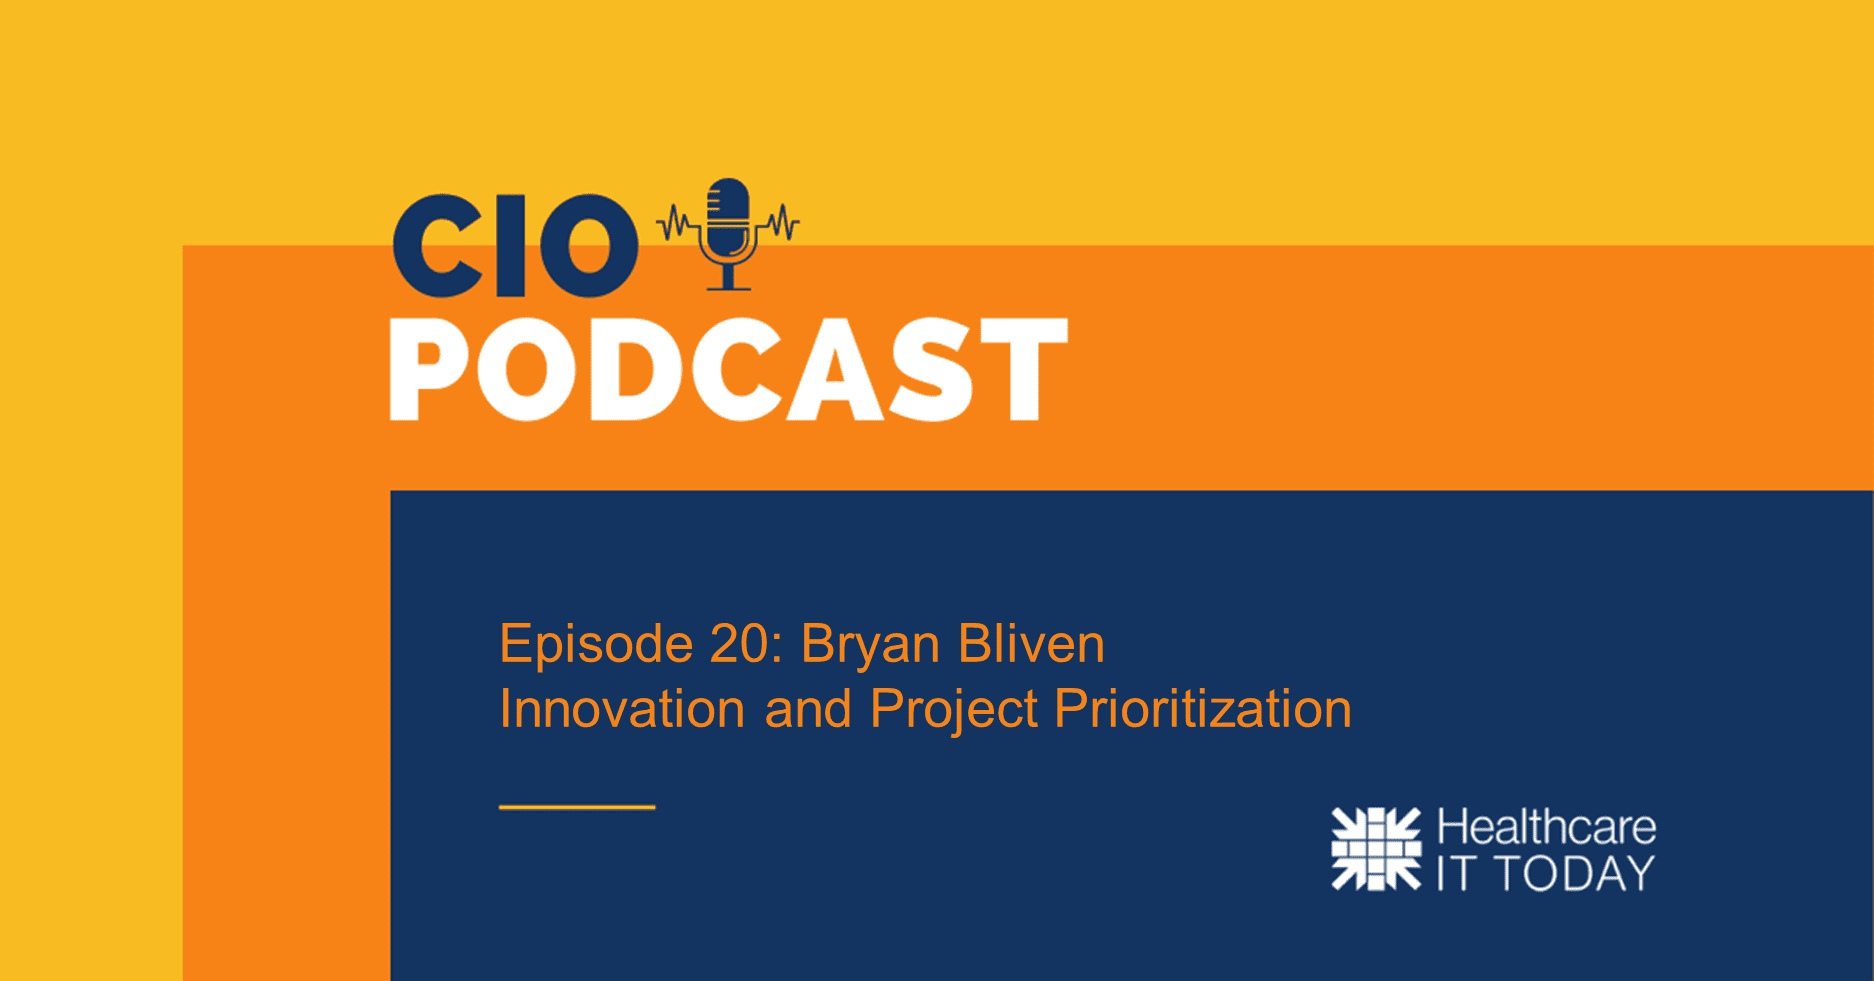 CIO Podcast – Episode 20: Bryan Bliven on Innovation and Project Prioritization